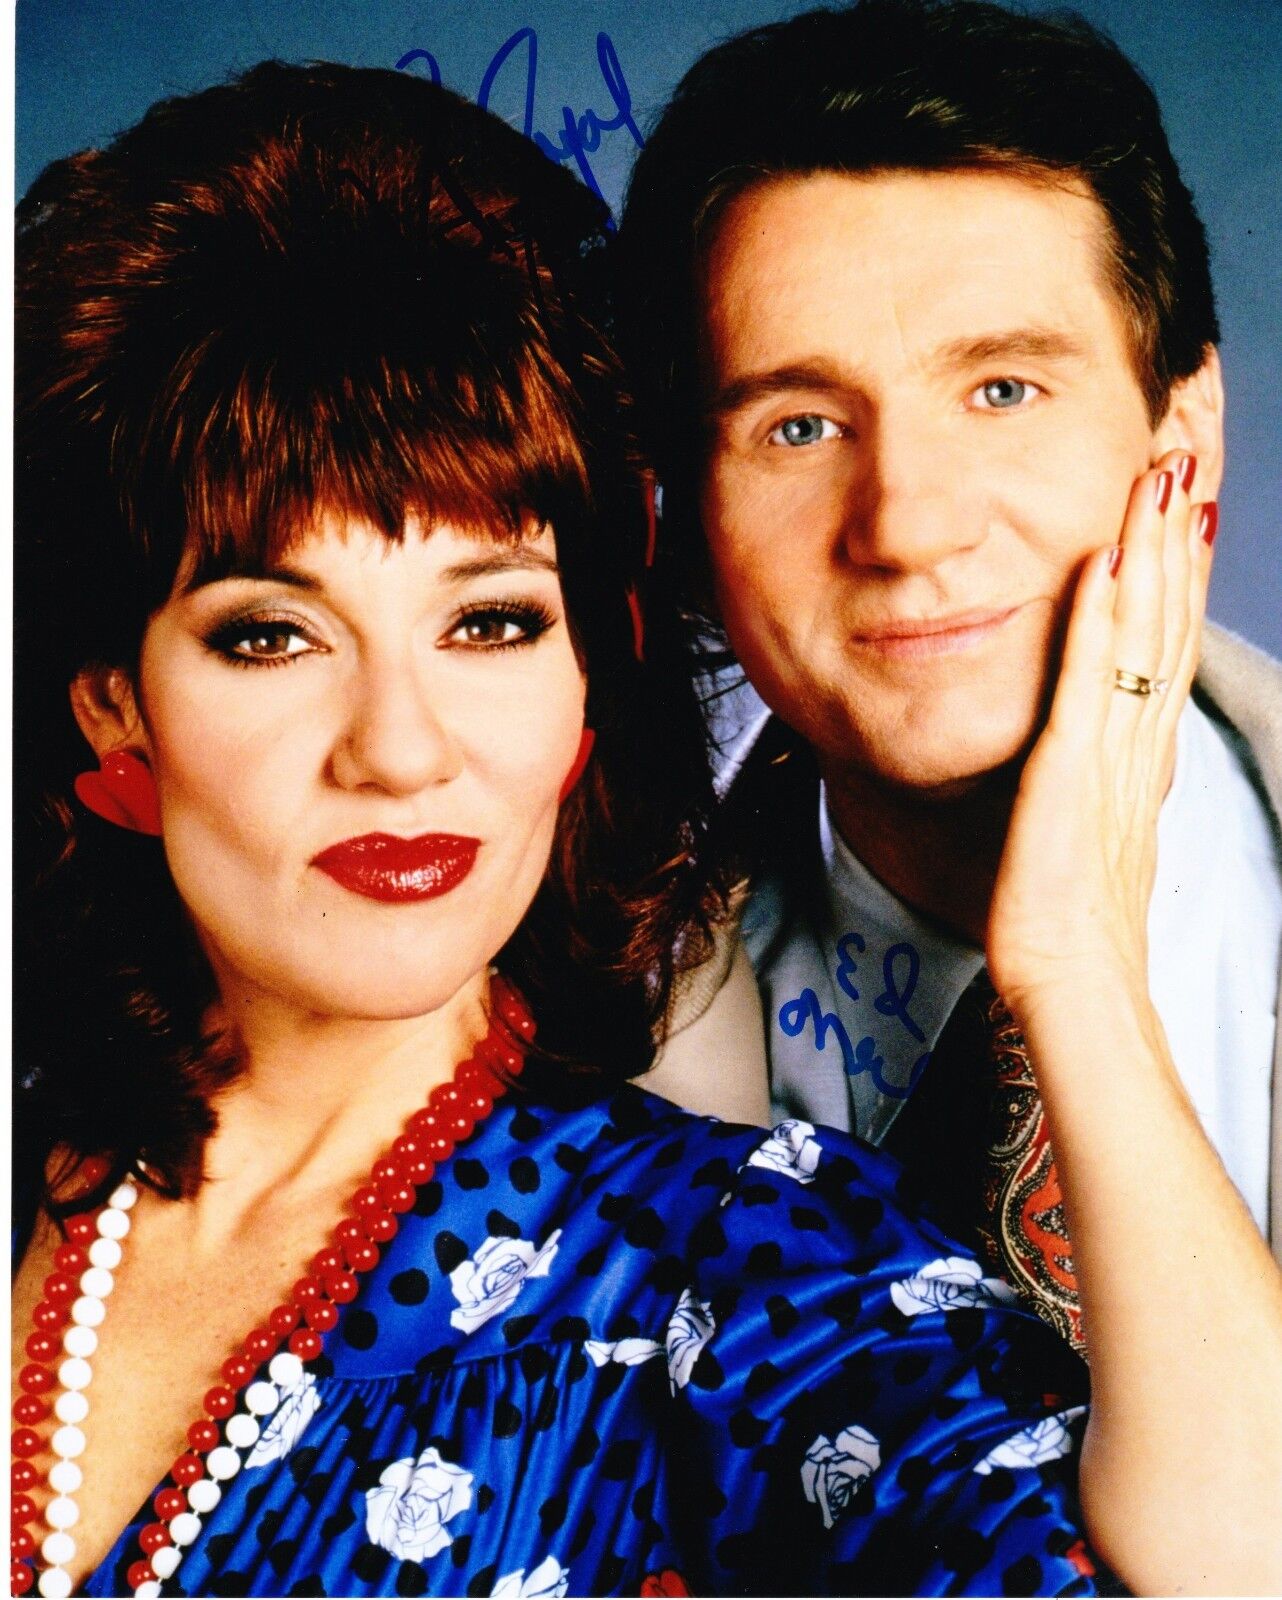 ED O'NEILL KATEY SAGAL SIGNED 8X10 PHOTO AL PEGGY BUNDY MARRIED WITH CHILDREN